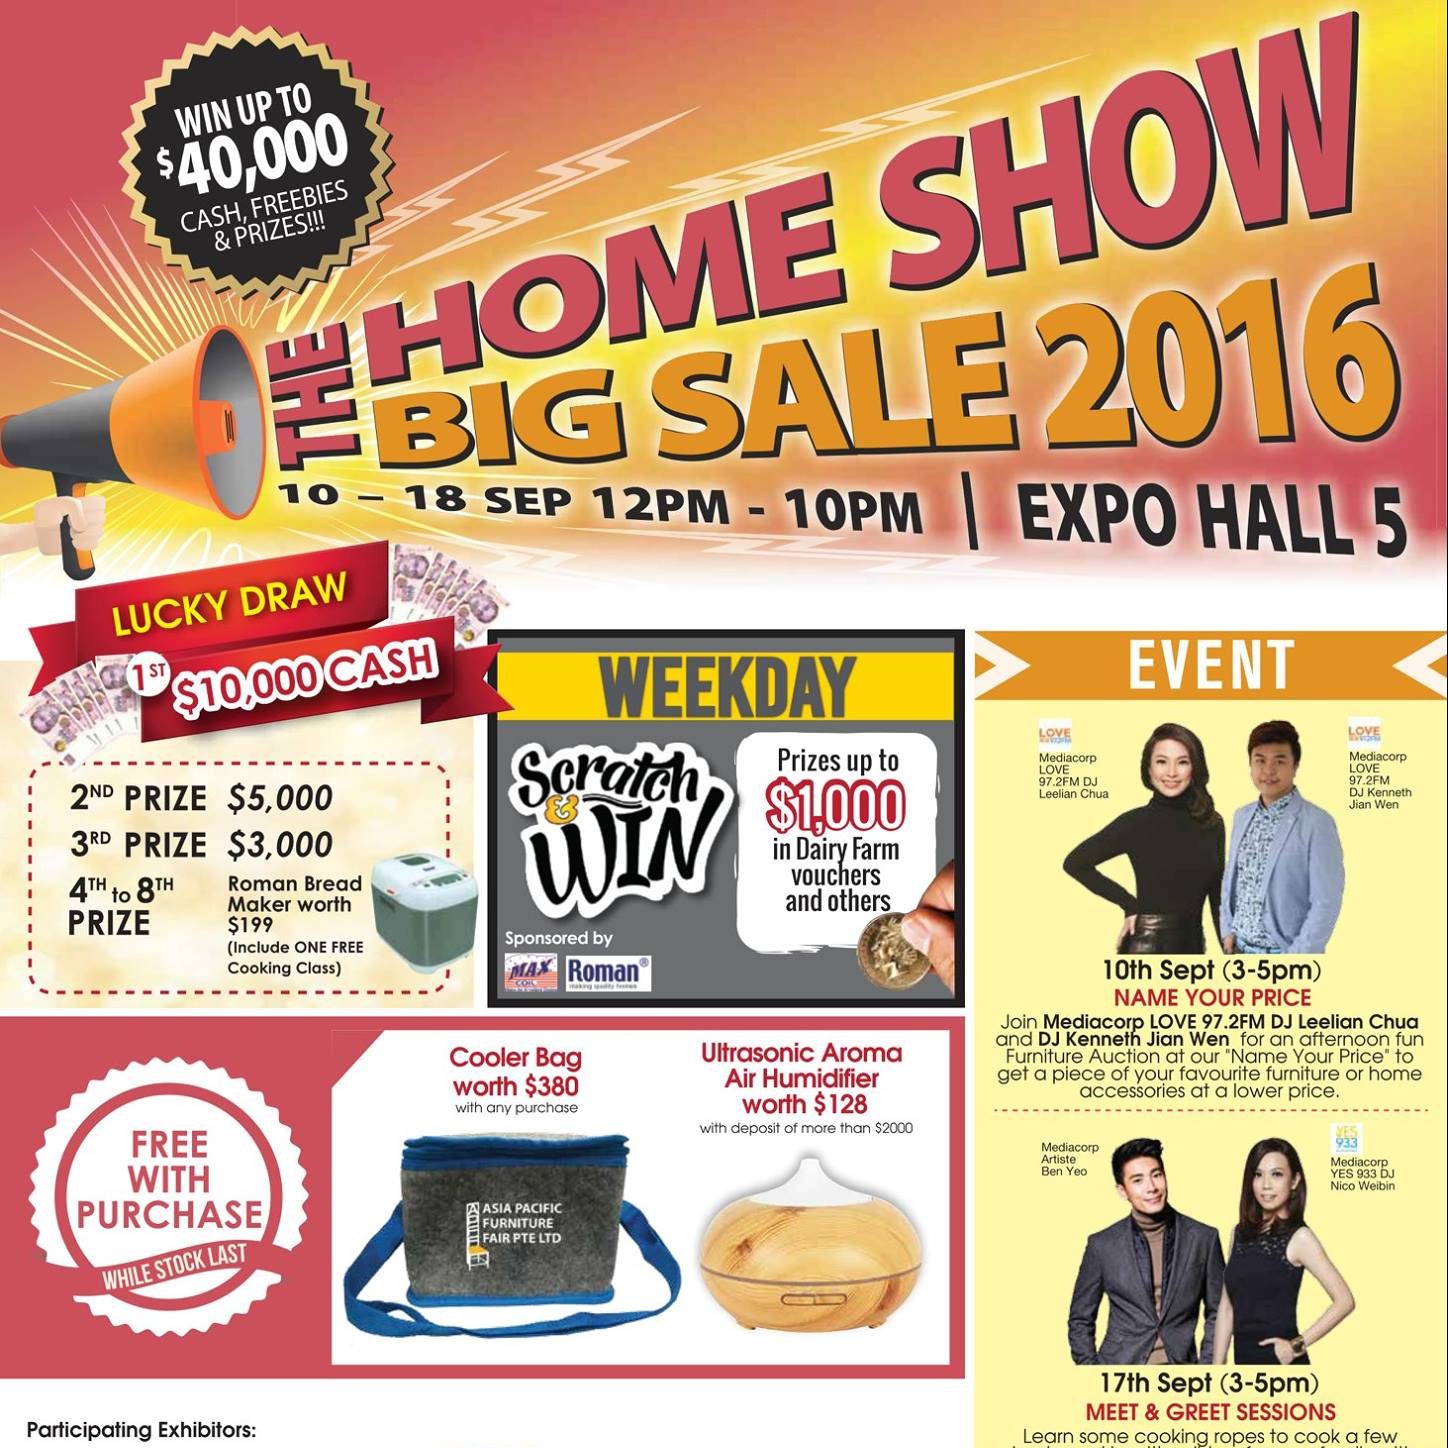 APFF Singapore The Home Show Big Sale 2016 Promotion 10 to 18 Sep 2016